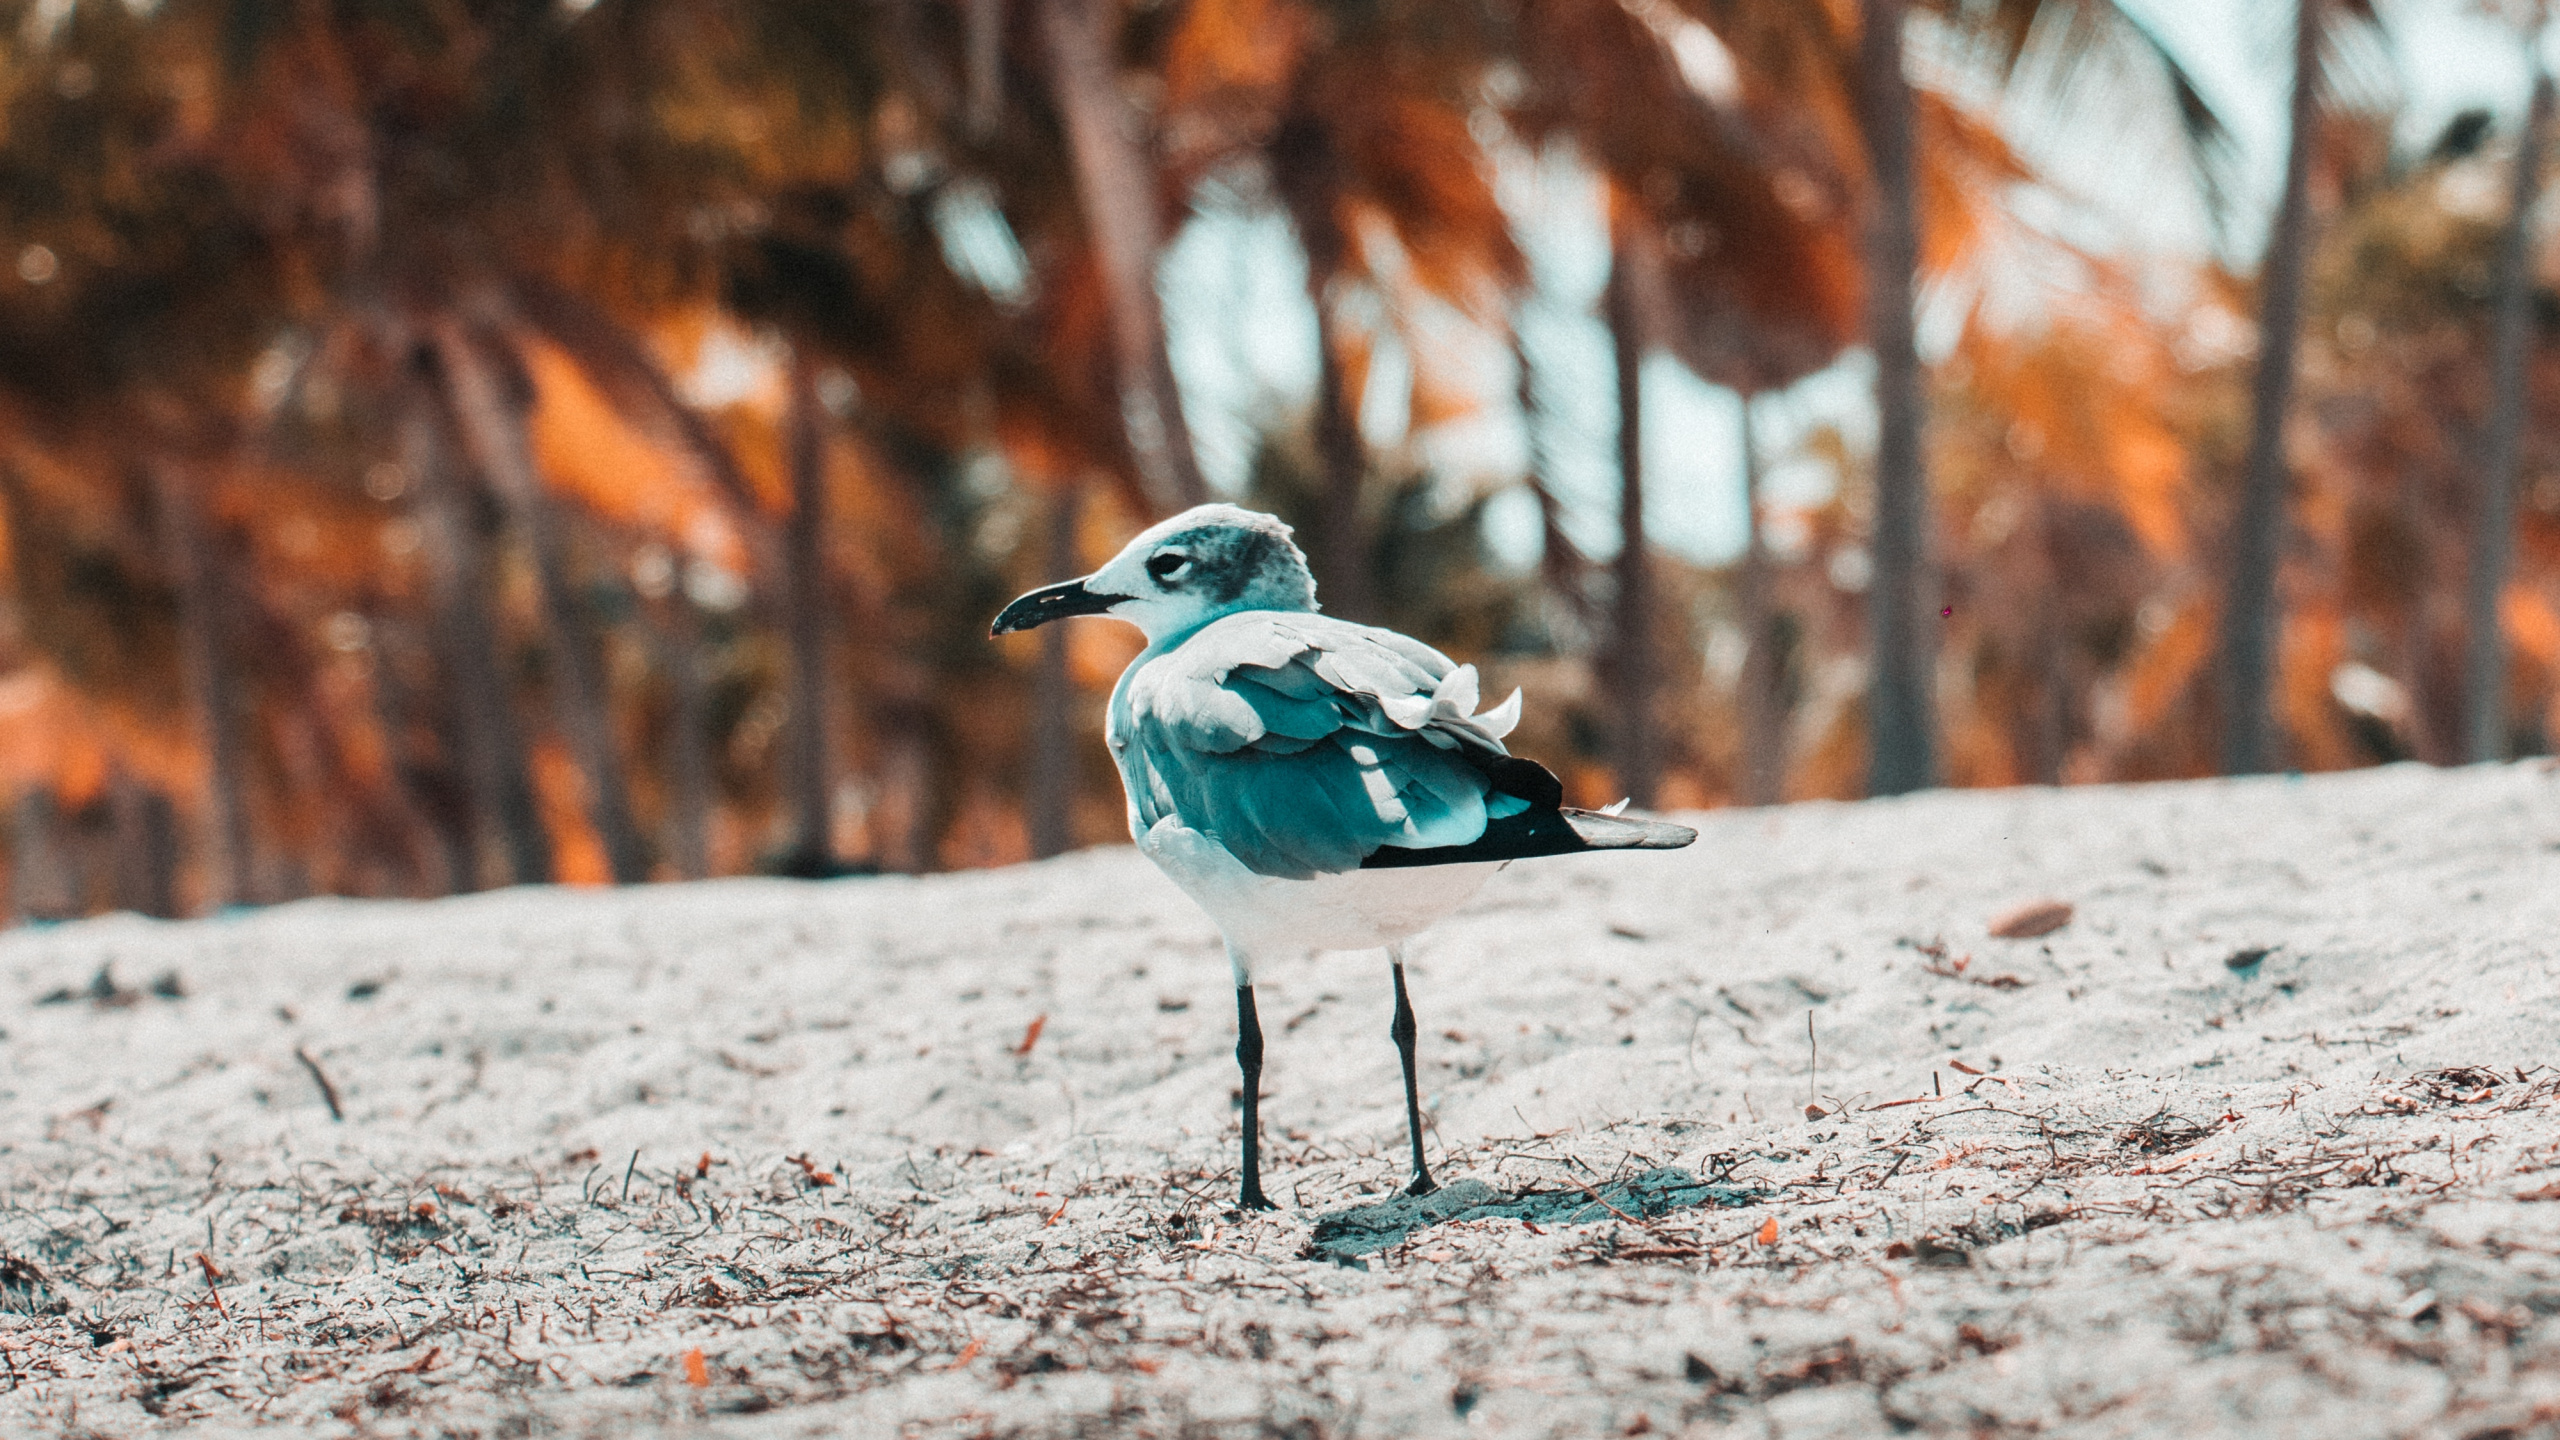 Blue and White Bird on Gray Sand During Daytime. Wallpaper in 2560x1440 Resolution